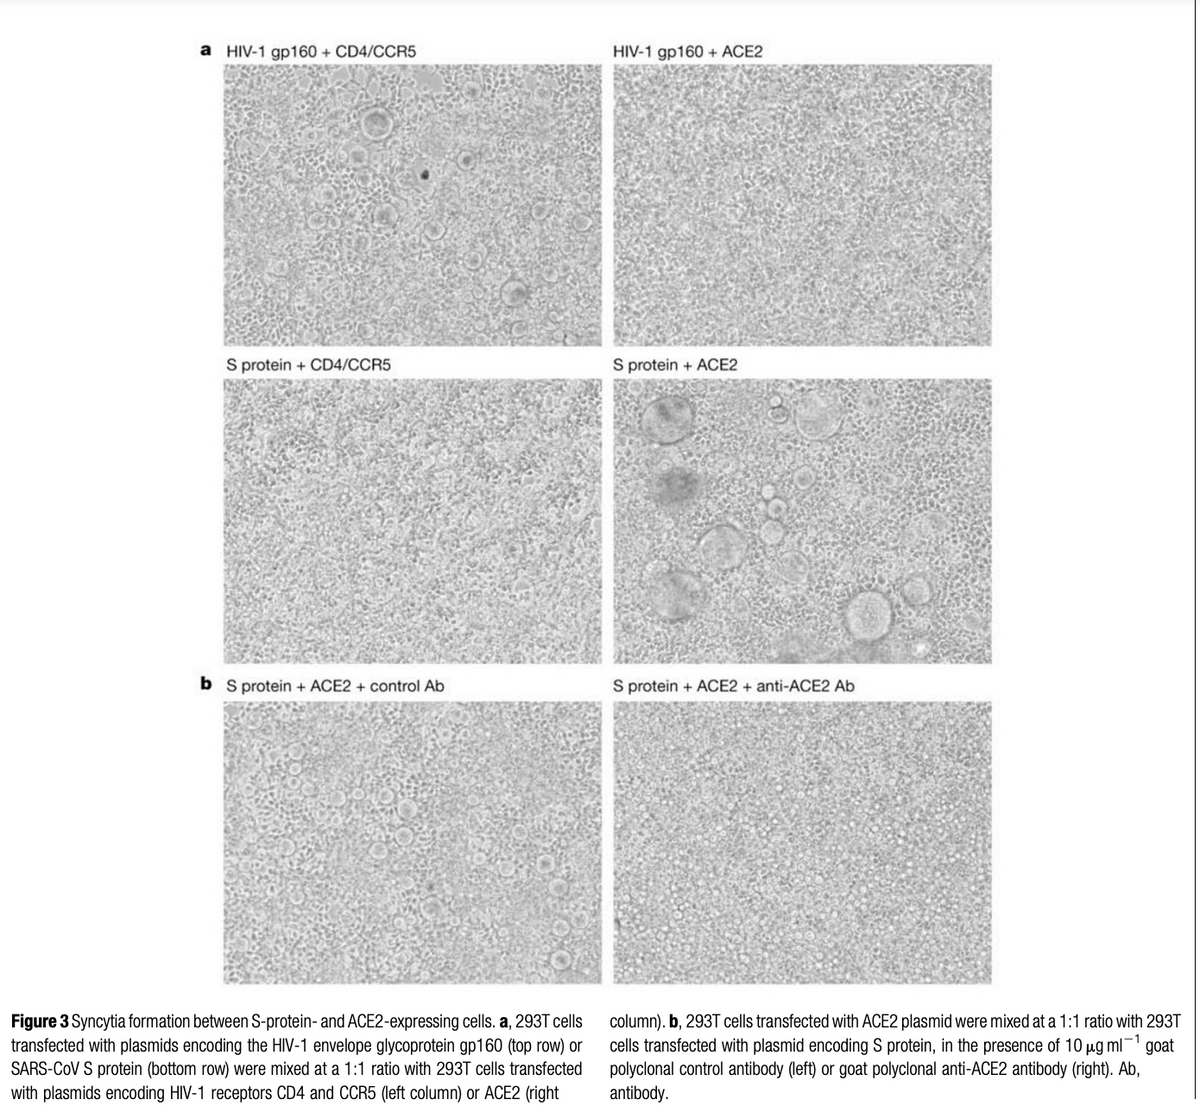 a HIV-1 gp160 + CD4/CCR5
S protein + CD4/CCR5
b S protein + ACE2 + control Ab
Figure 3 Syncytia formation between S-protein- and ACE2-expressing cells. a, 293T cells
transfected with plasmids encoding the HIV-1 envelope glycoprotein gp160 (top row) or
SARS-CoV S protein (bottom row) were mixed at a 1:1 ratio with 293T cells transfected
with plasmids encoding HIV-1 receptors CD4 and CCR5 (left column) or ACE2 (right
HIV-1 gp160 + ACE2
S protein + ACE2
S protein + ACE2 + anti-ACE2 Ab
column). b, 293T cells transfected with ACE2 plasmid were mixed at a 1:1 ratio with 293T
cells transfected with plasmid encoding S protein, in the presence of 10 μg ml-1 goat
polyclonal control antibody (left) or goat polyclonal anti-ACE2 antibody (right). Ab,
antibody.